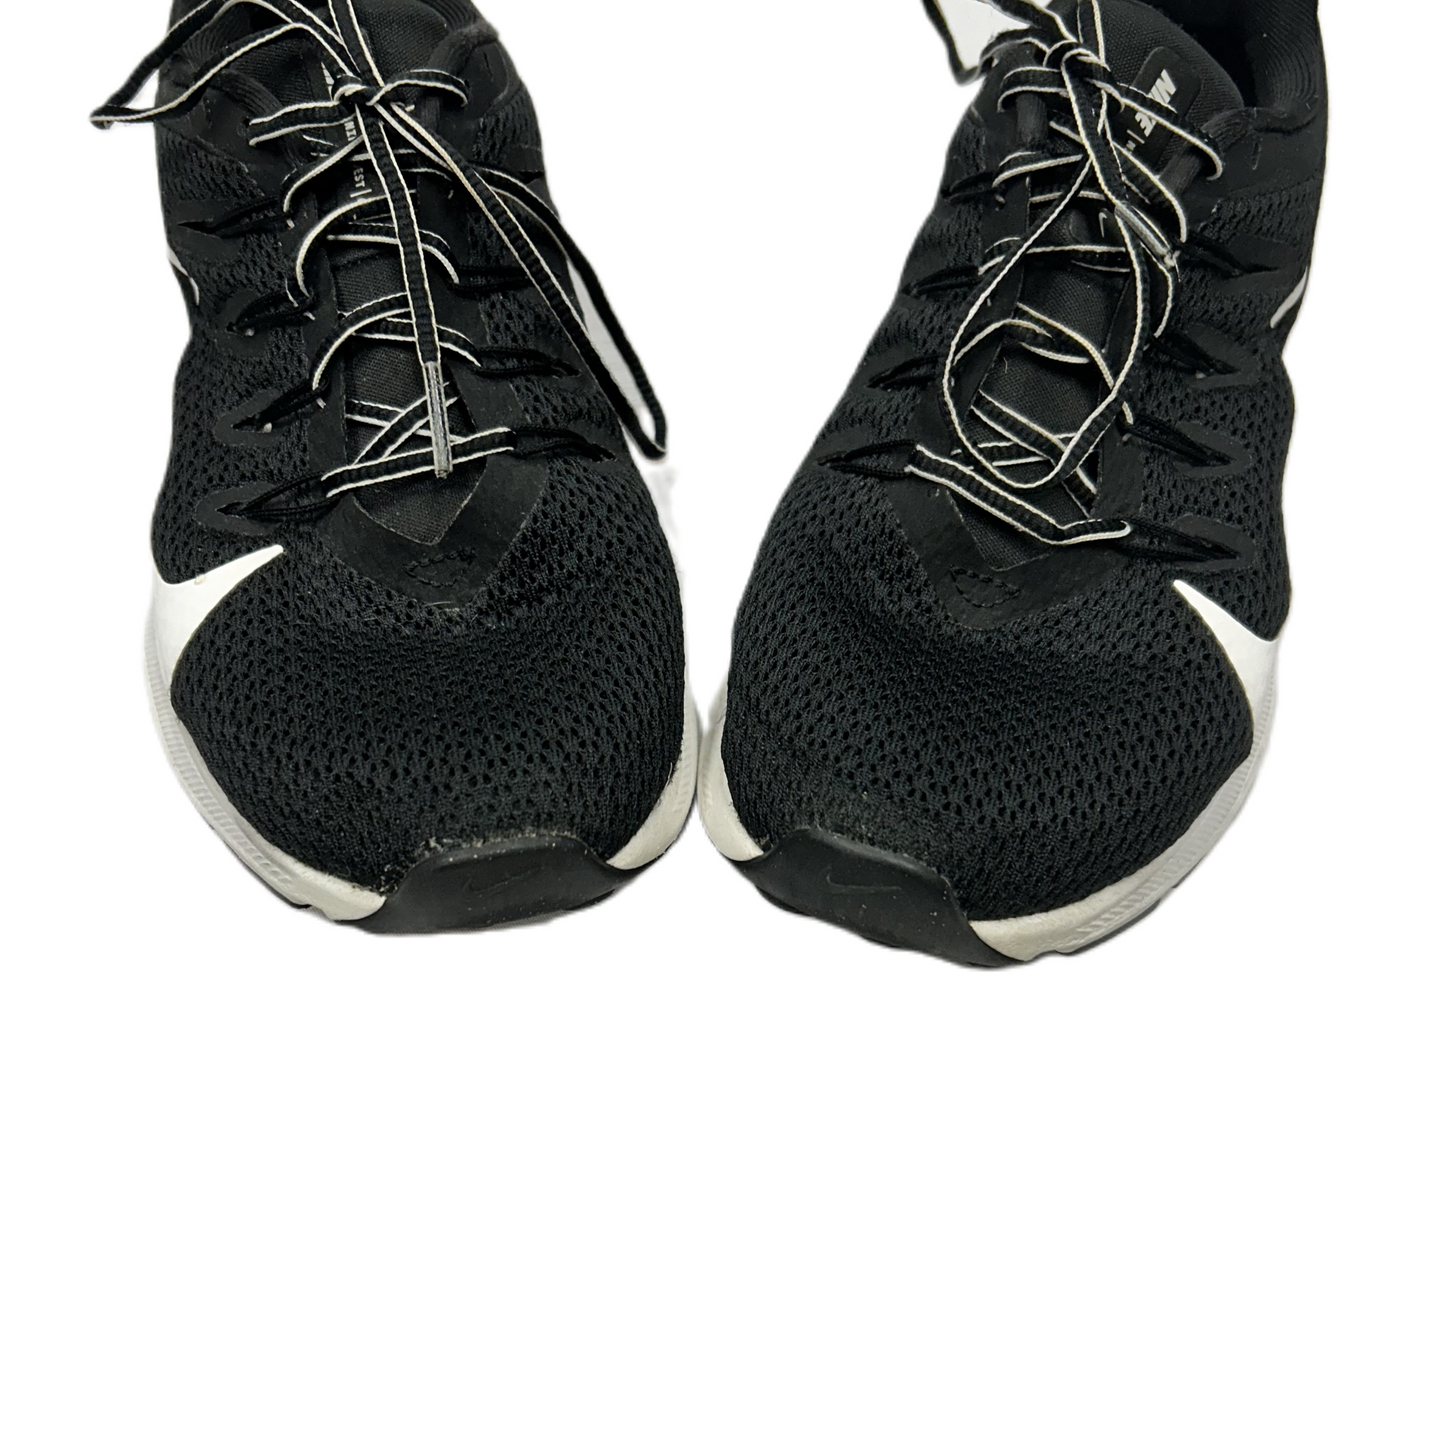 Black Shoes Athletic By Nike, Size: 7